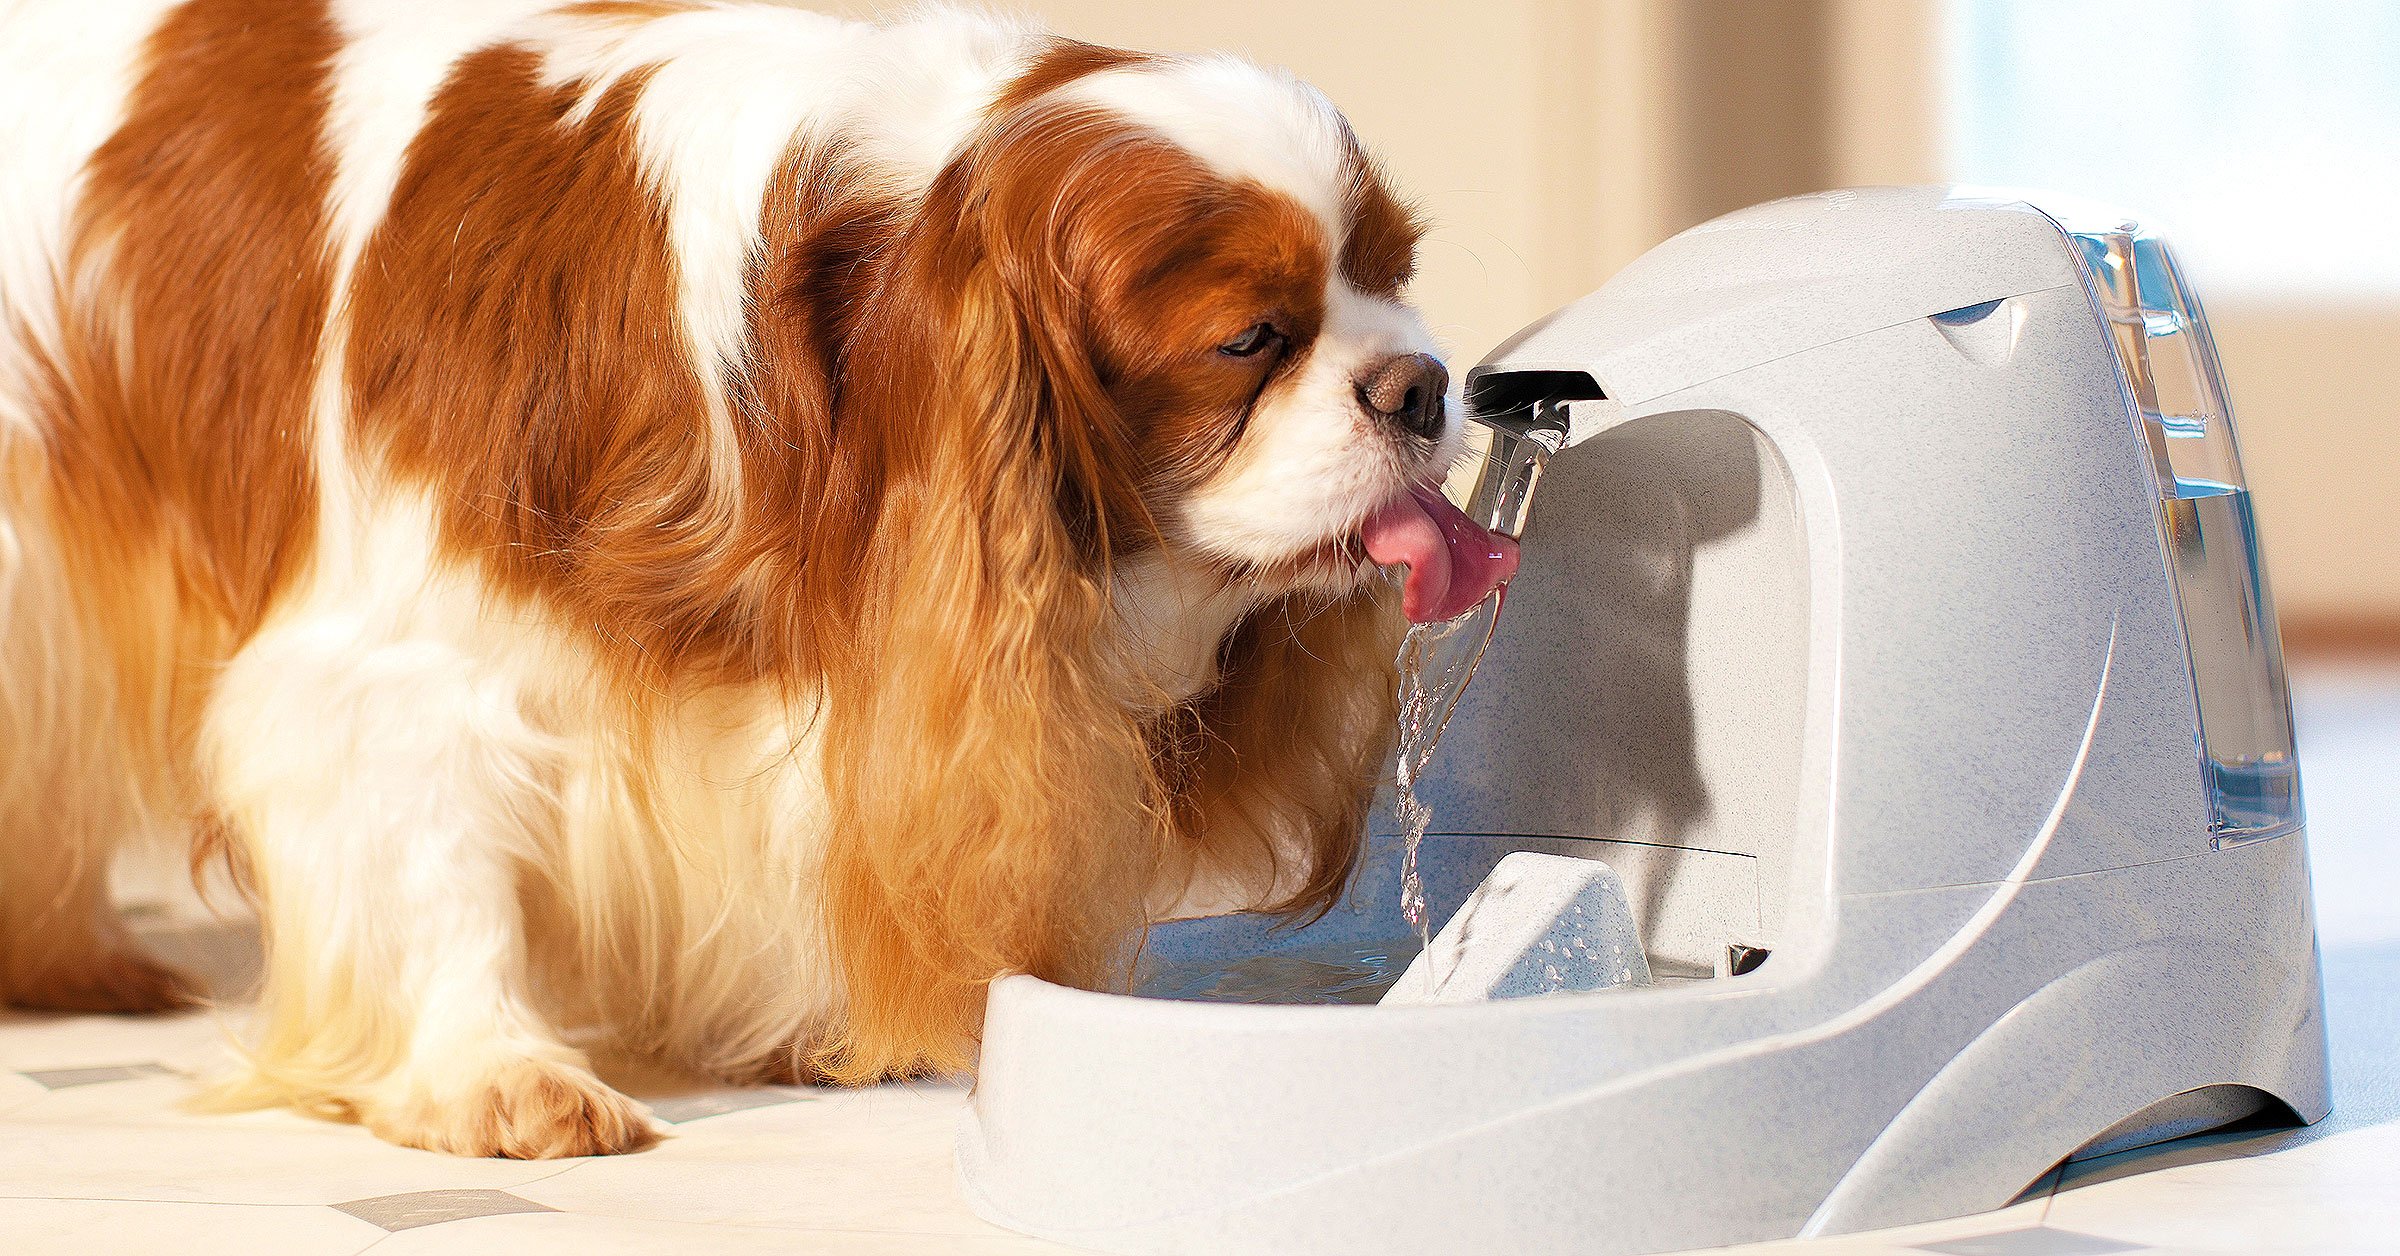 Running fresh water and a happy dog drink...</div>
					</div>
					
										
									  
					<div class=